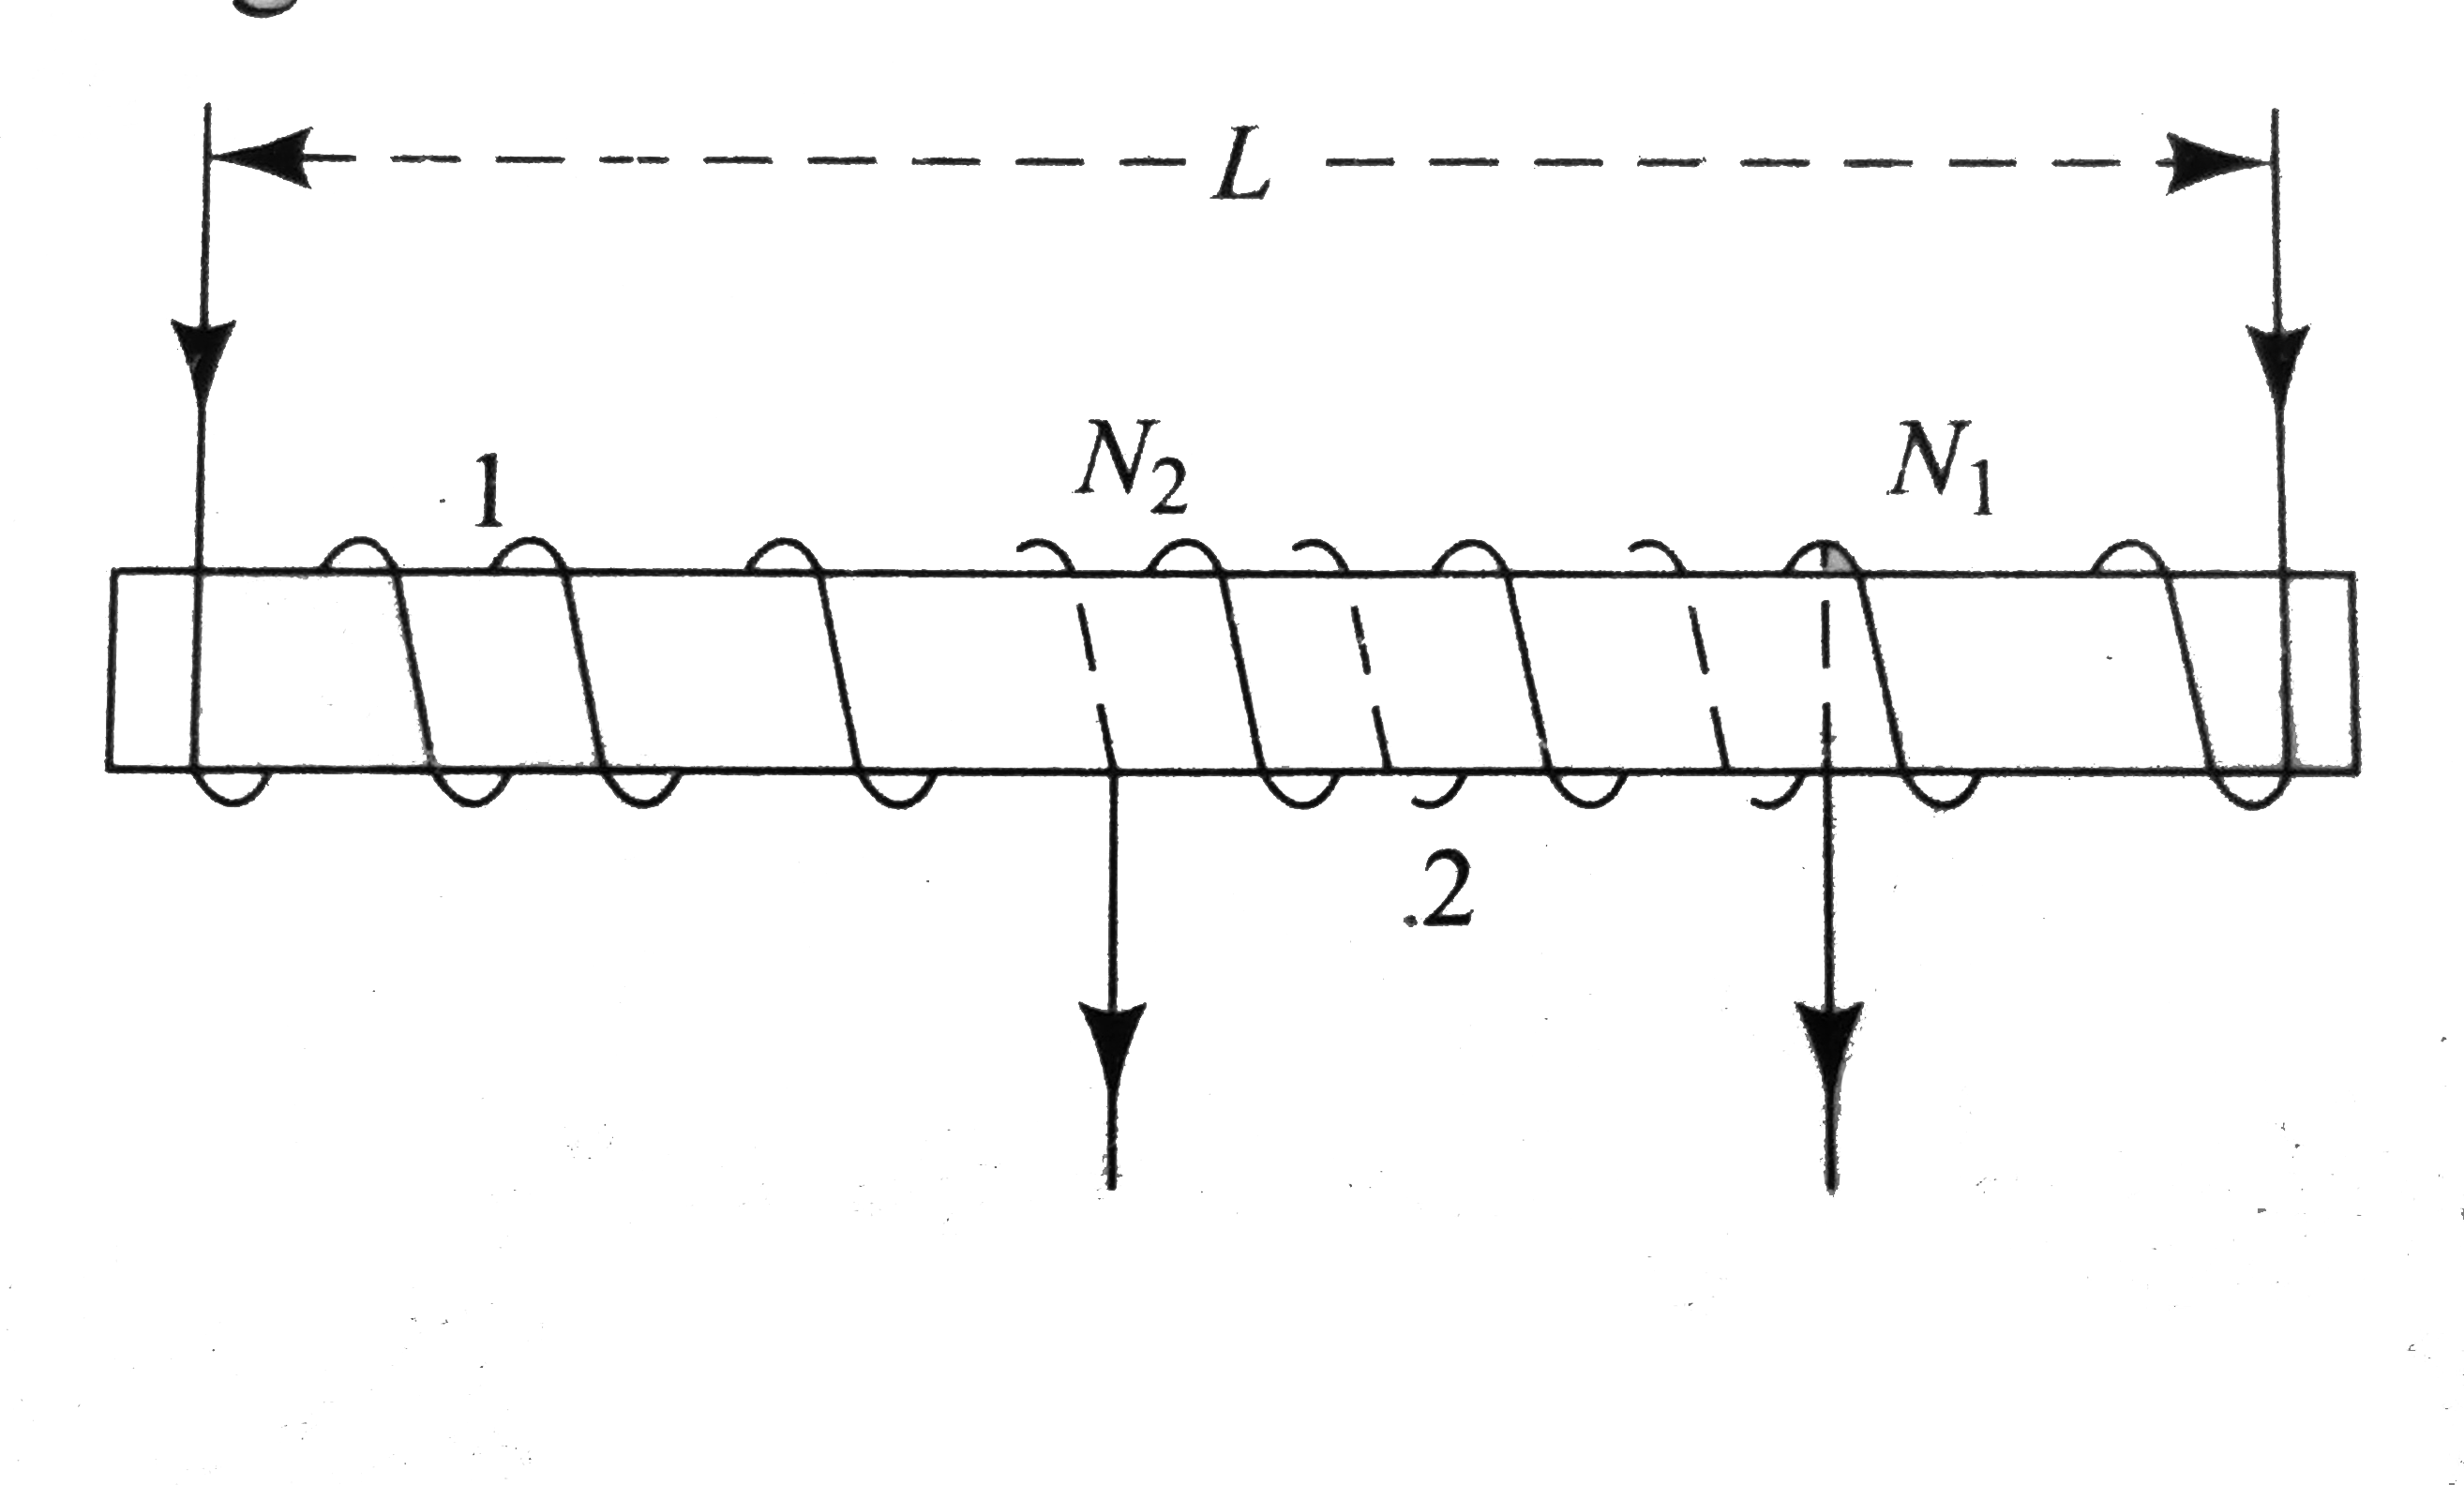 A long solenoid of length L, cross section A having N(1) turns has about its center a small coil of N(2) turns as shows in Fig The mutual inductance of two circuits is